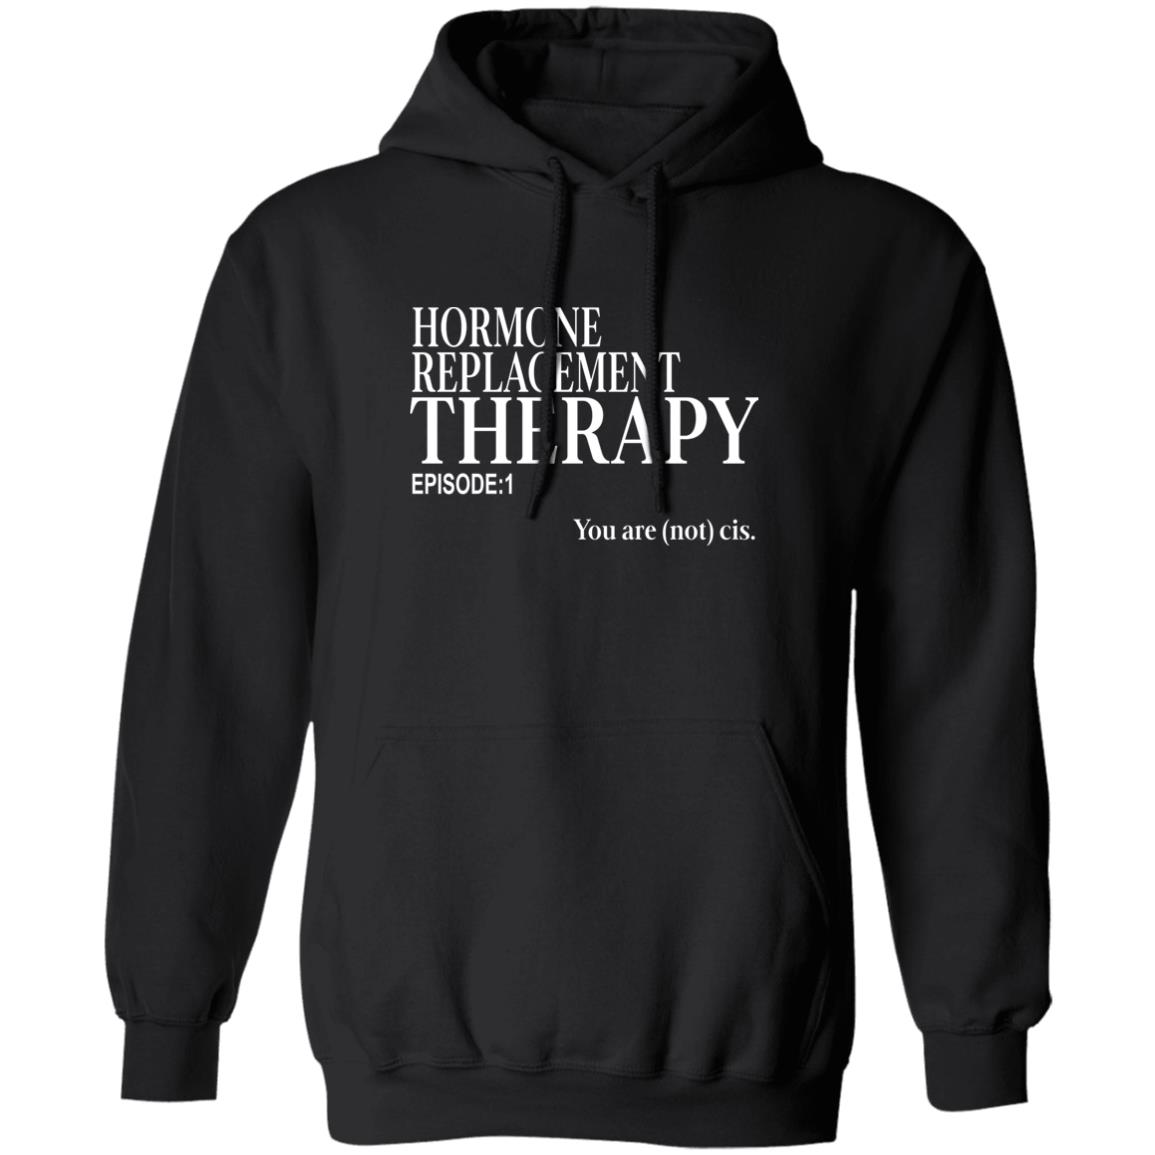 Hormone Replacement Therapy Episode 1 Shirt 2